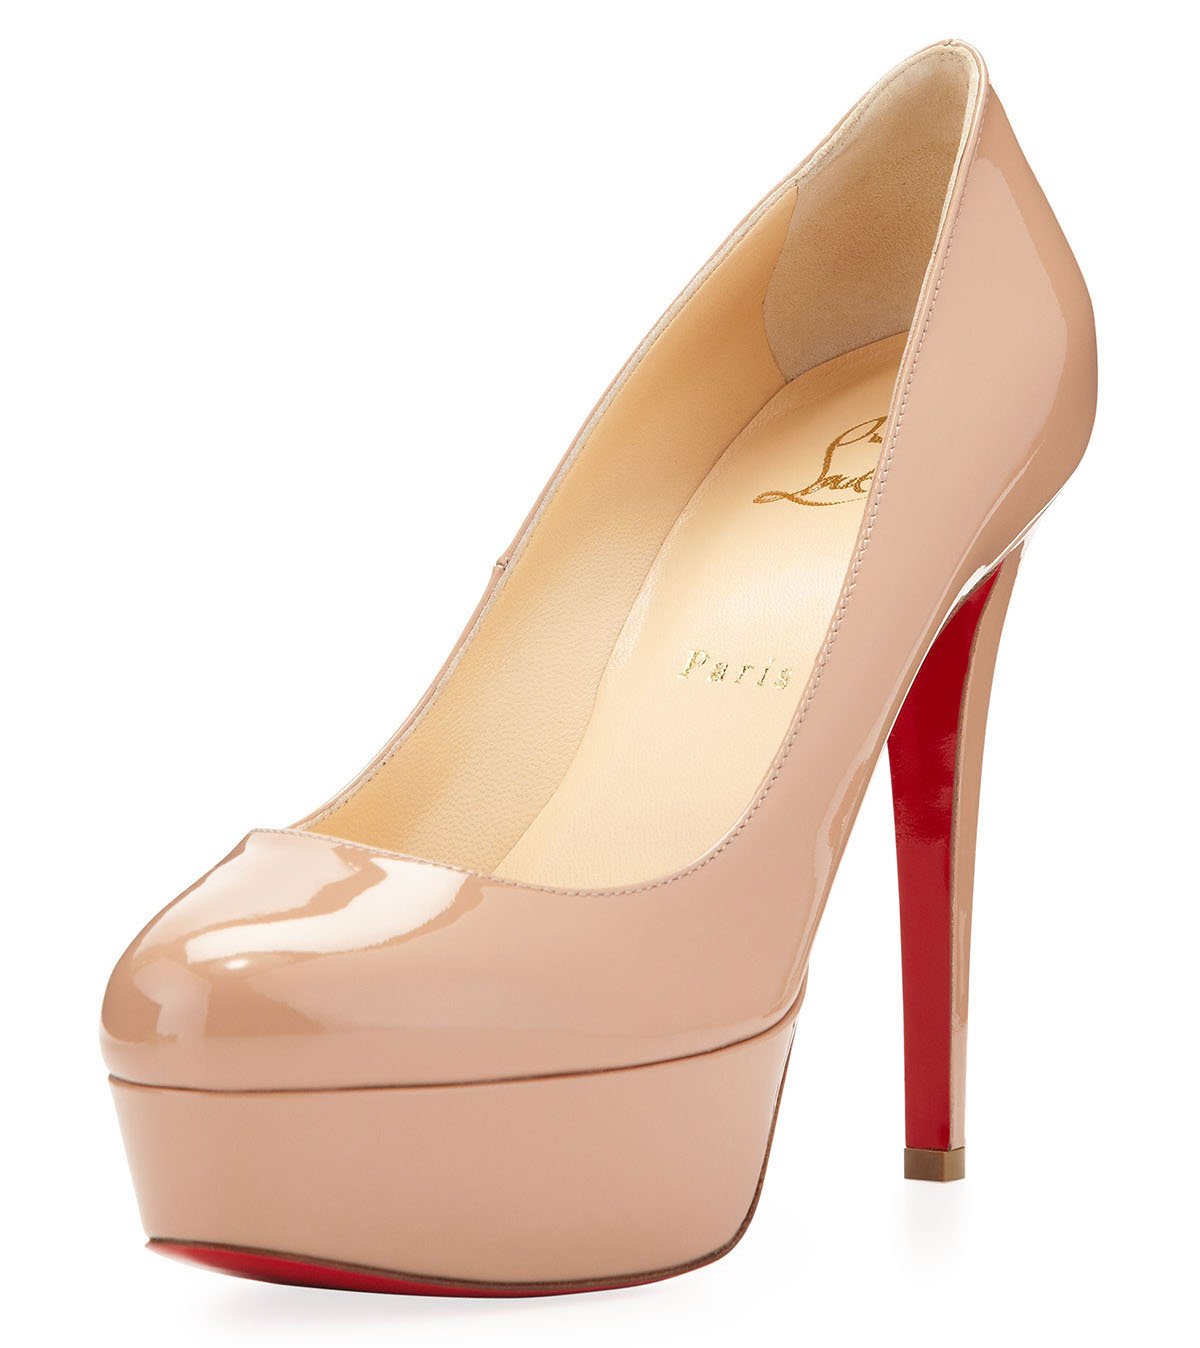 Round toes and platforms define the Christian Louboutin Bianca pumps